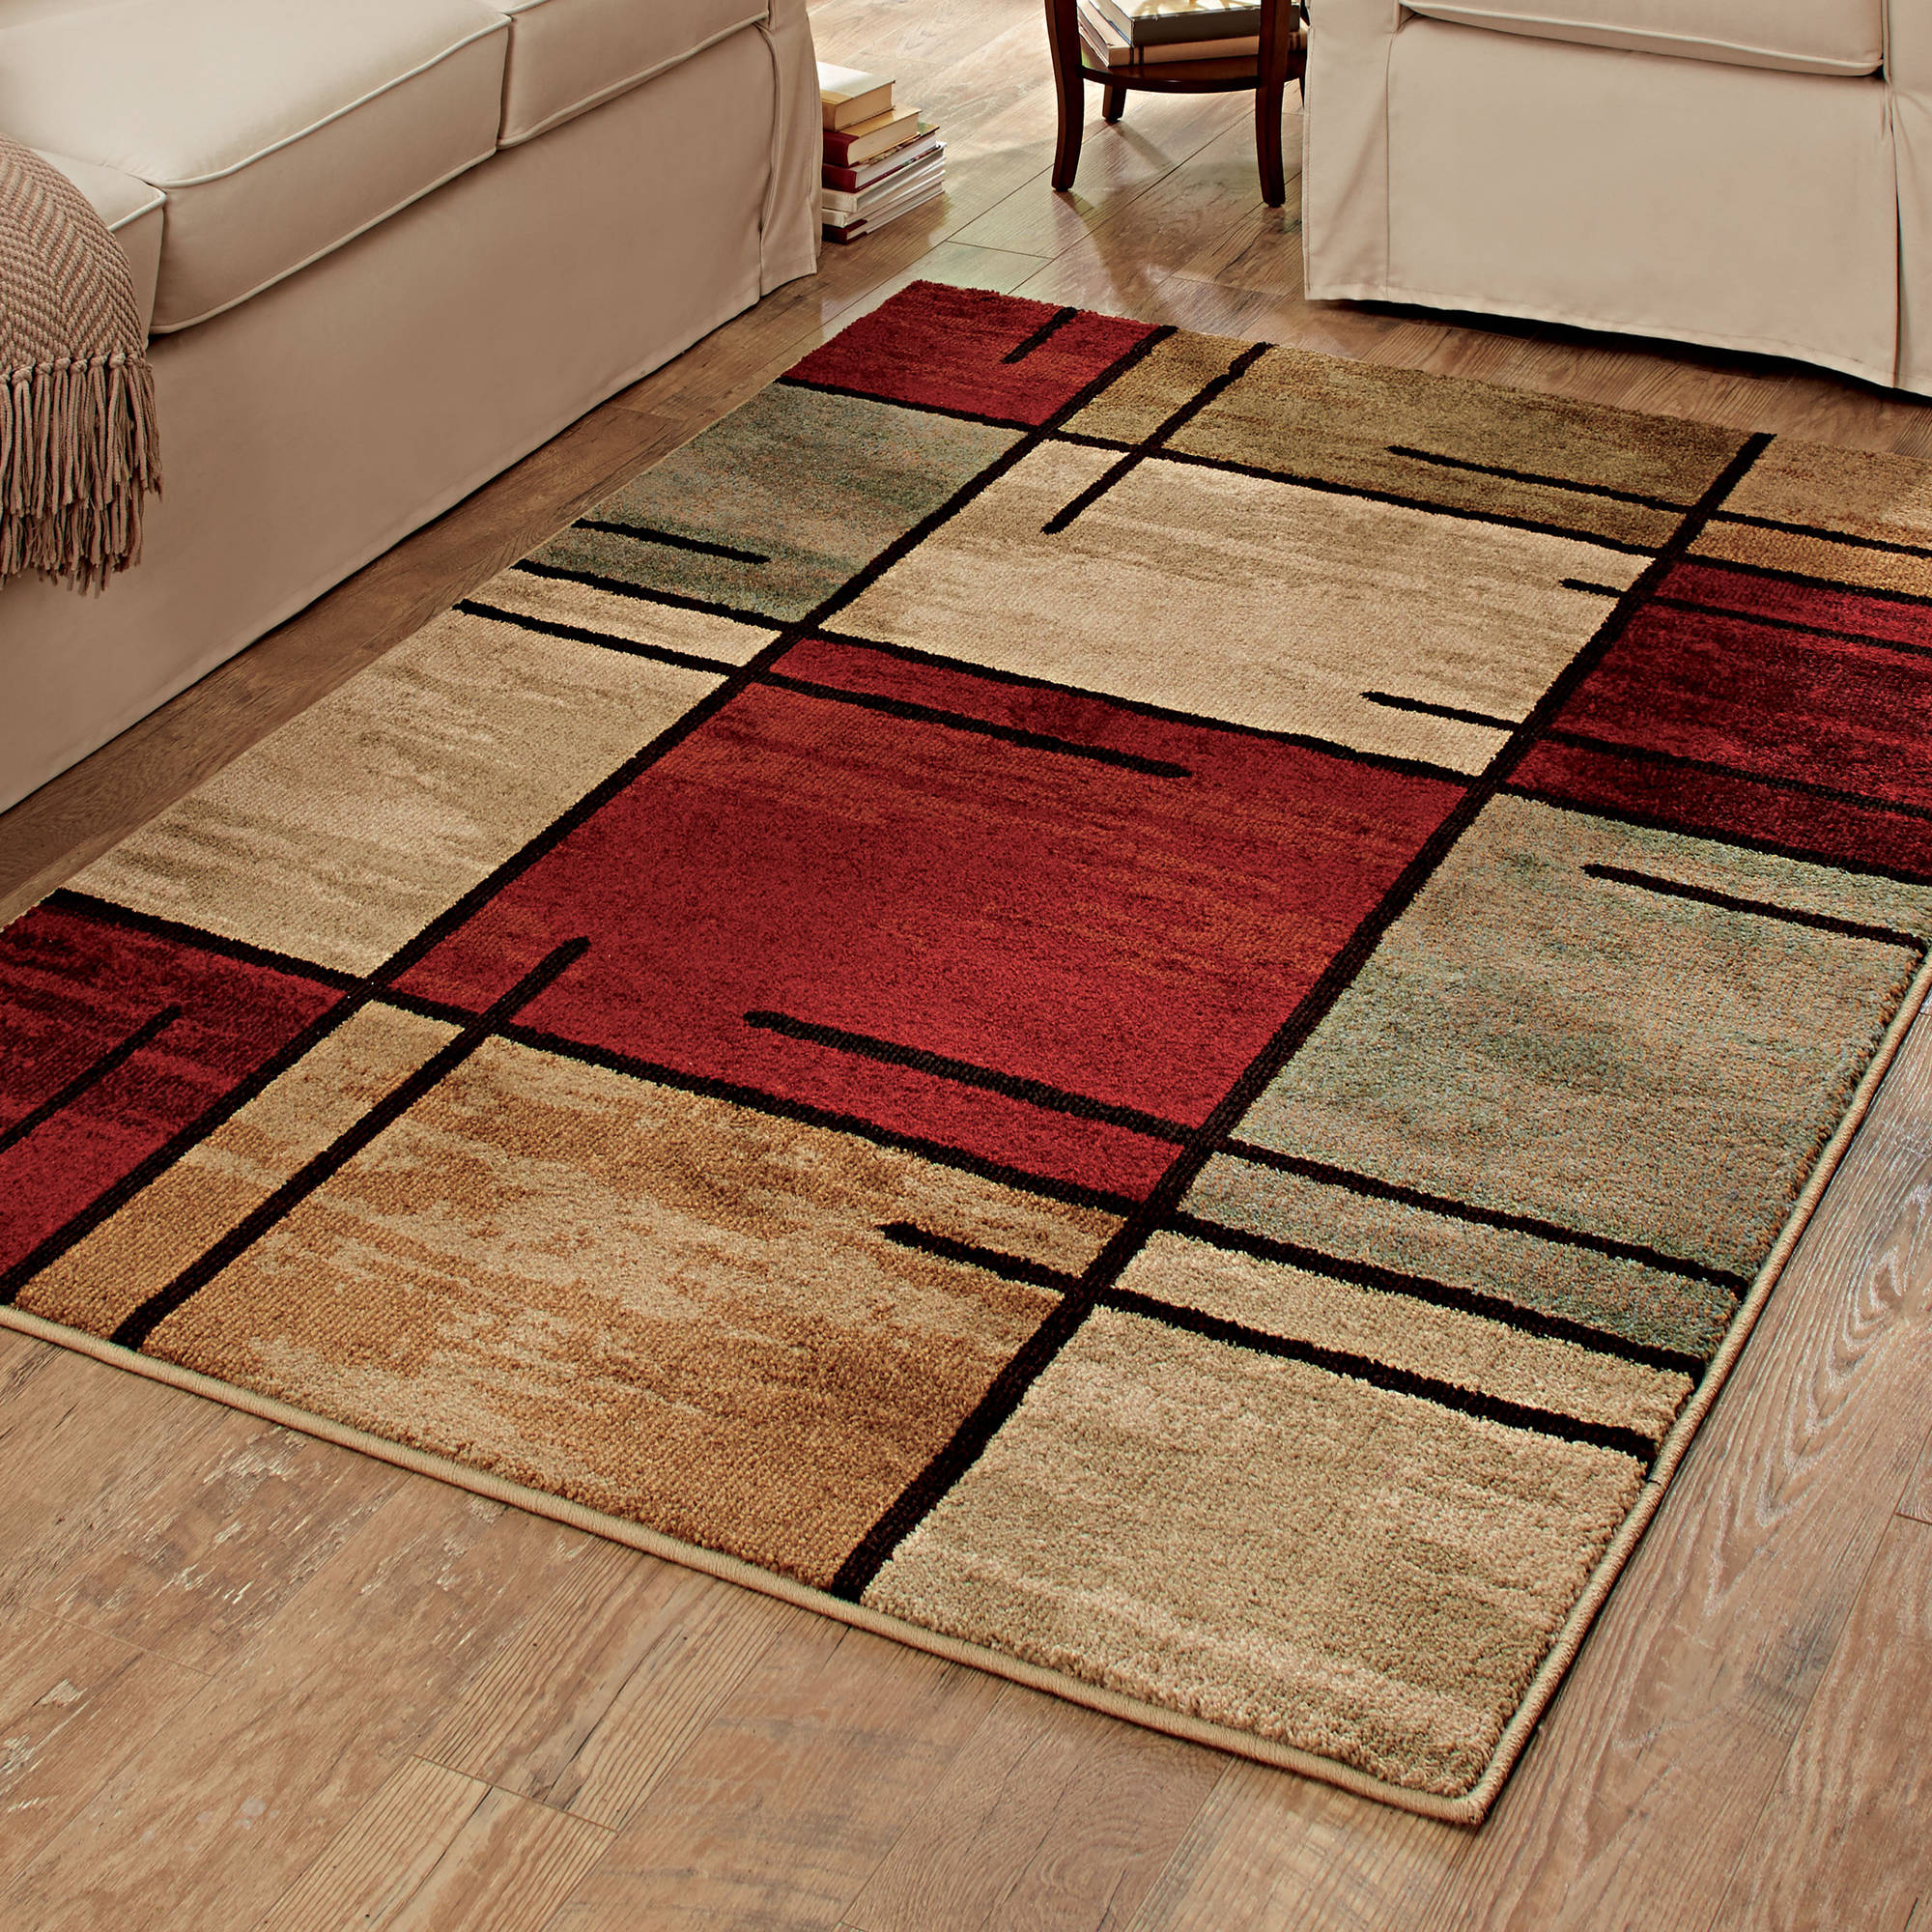 home rugs better homes and gardens spice grid area rug - walmart.com LBZSHWI